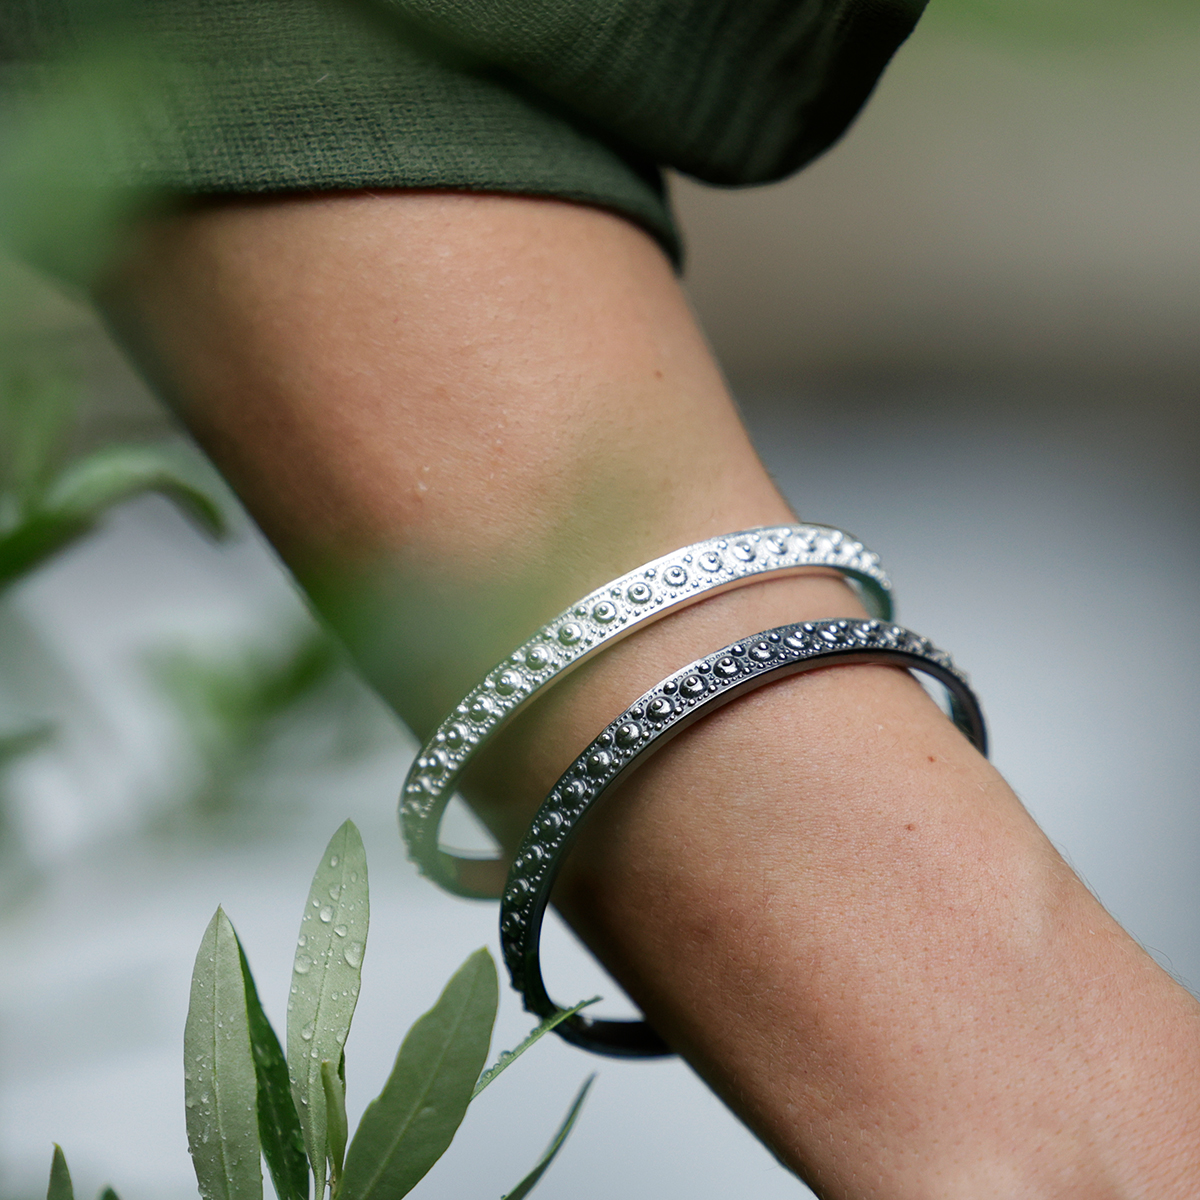 White and black silver bangles with sea urchin texture